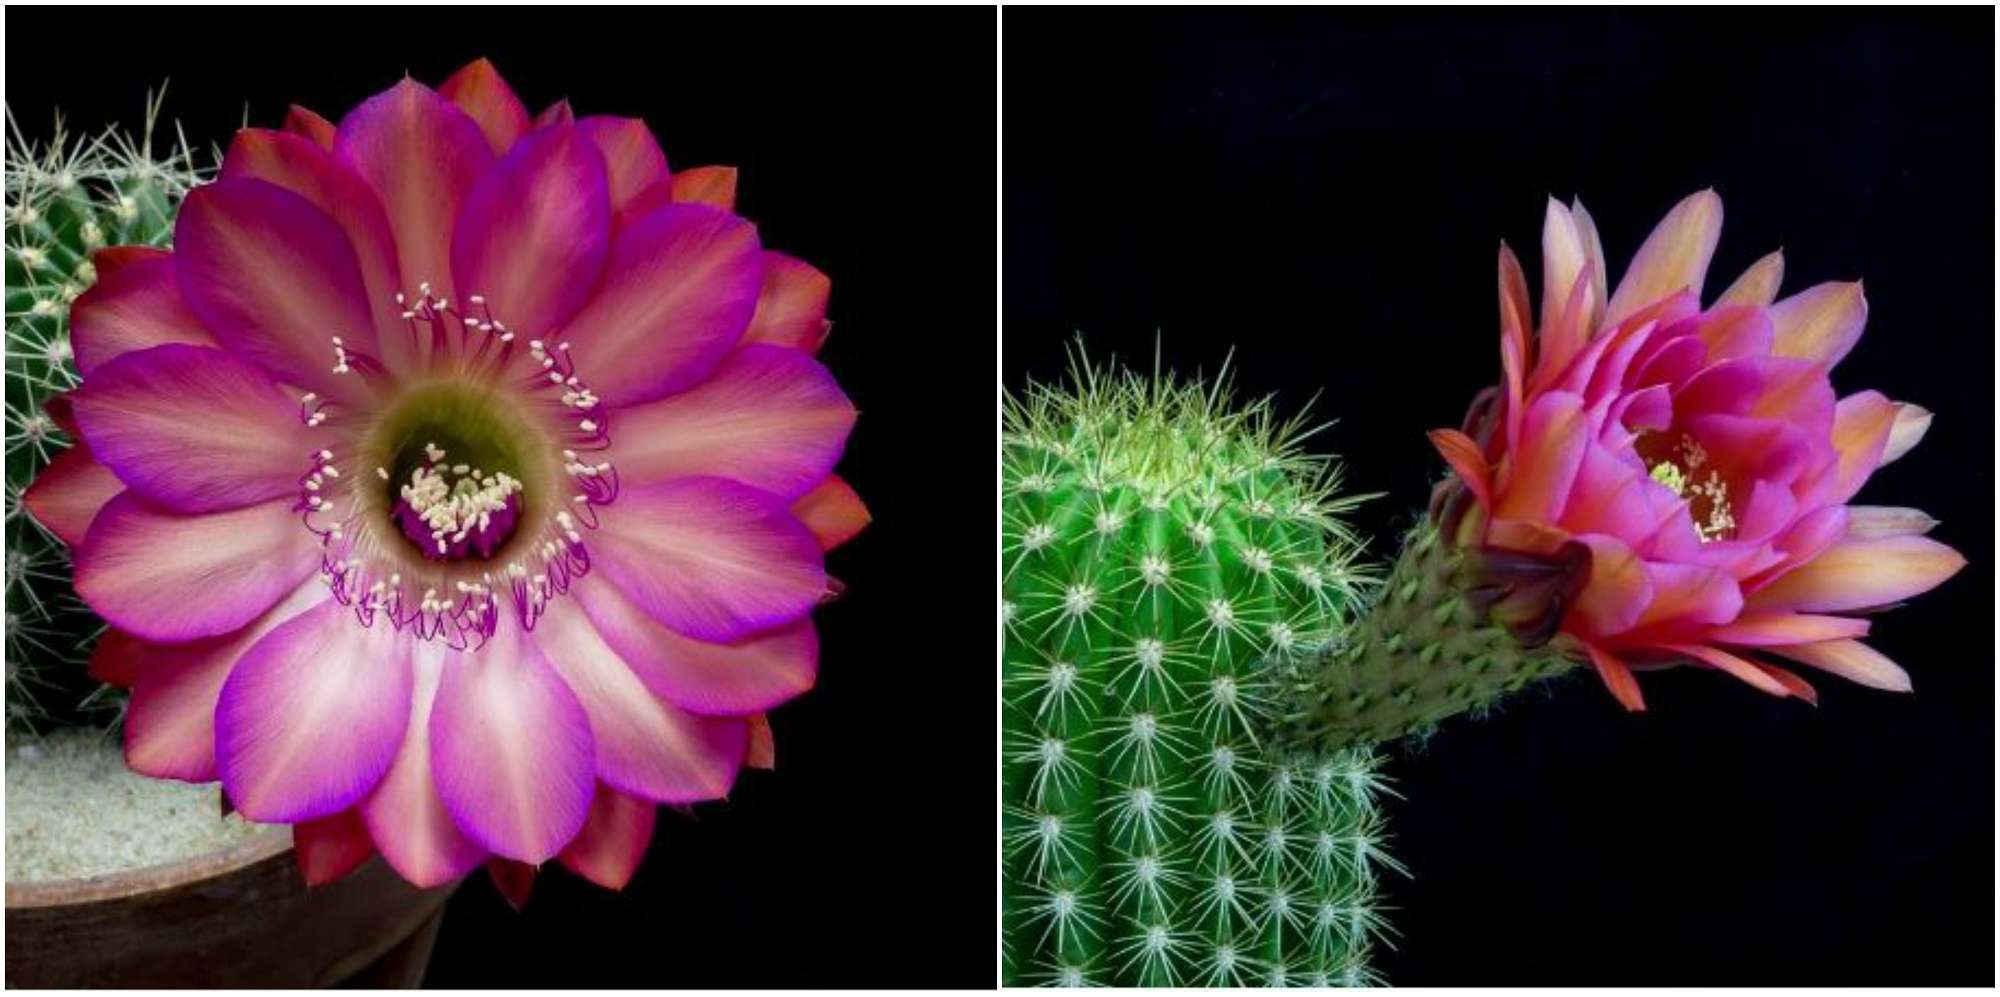 Brilliant Blooming Cactus Flowers Overnight is Absolutely Hypnotizing